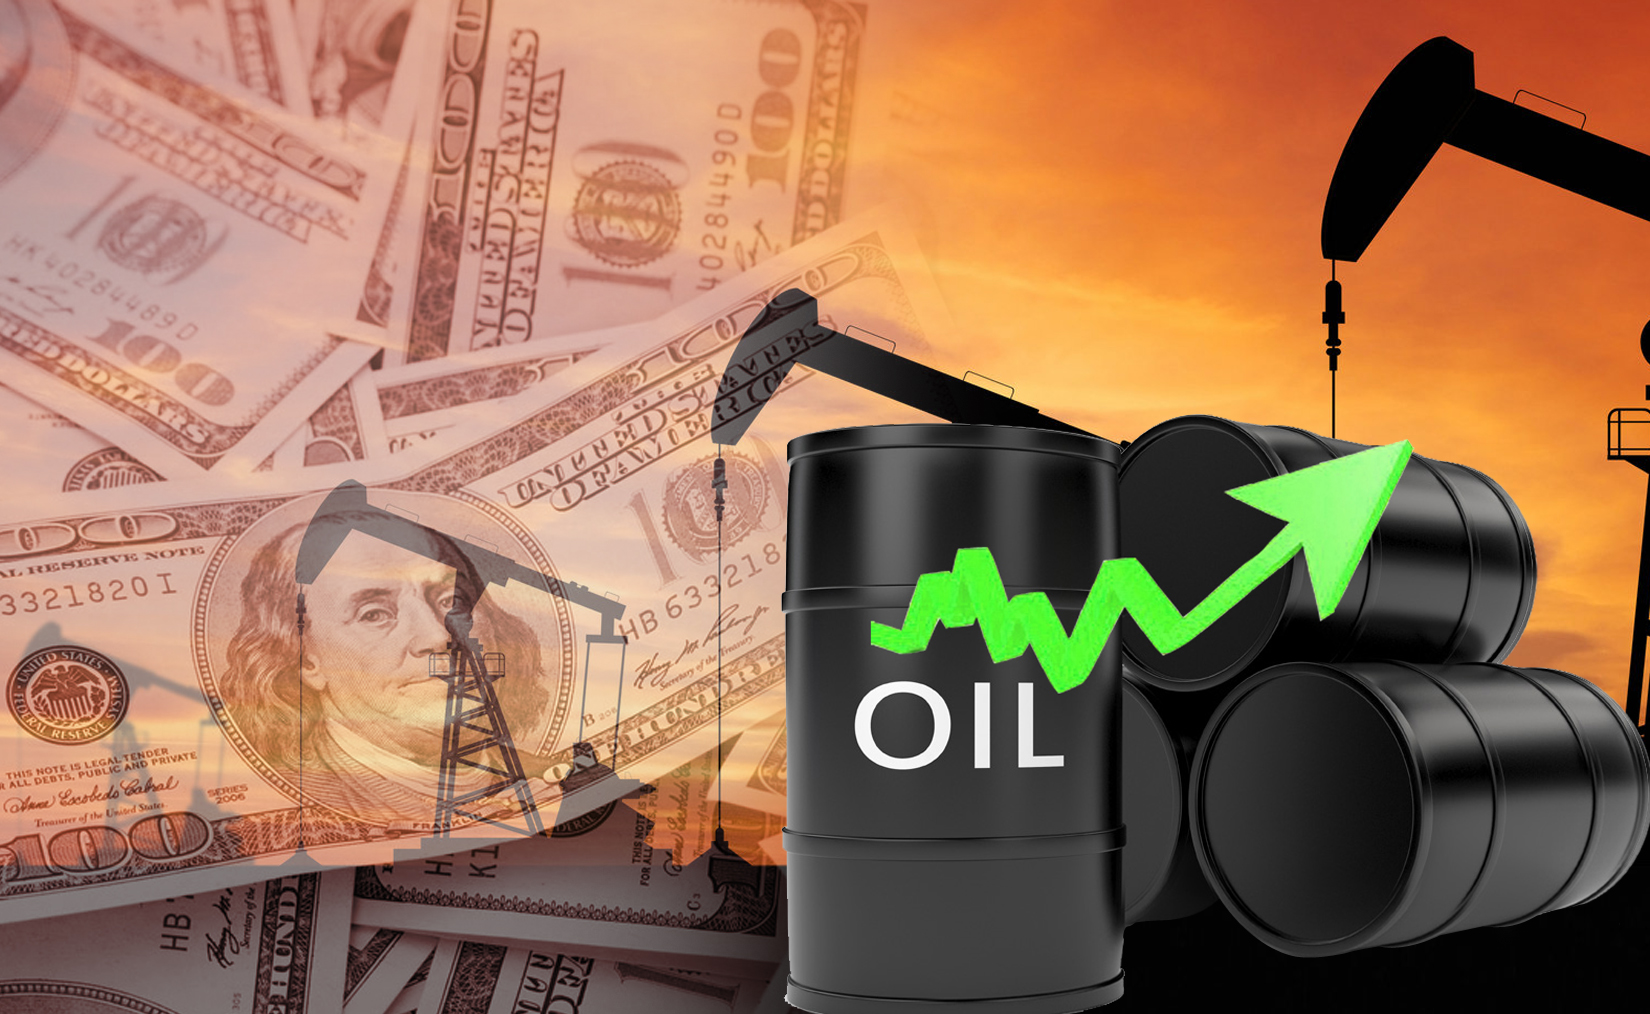 Kuwait oil price rises Tuesday 86 cents to USD 75.52 pb                                                                                                                                                                                                   